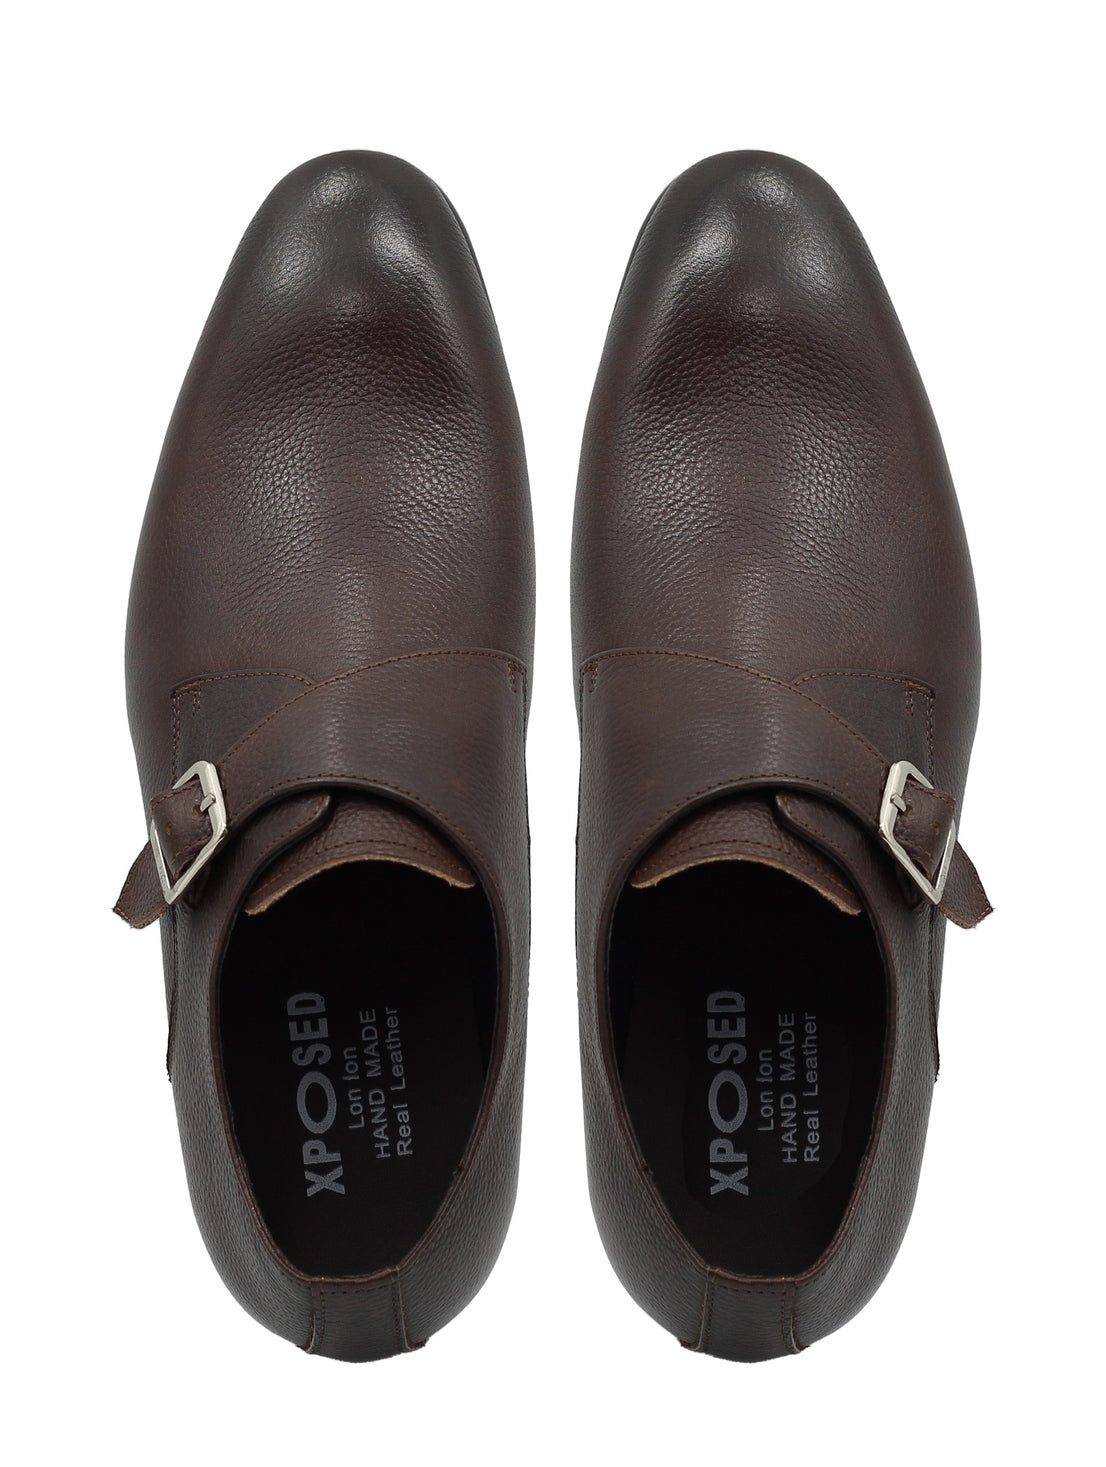 BROWN GRAIN LEATHER MONK SHOES